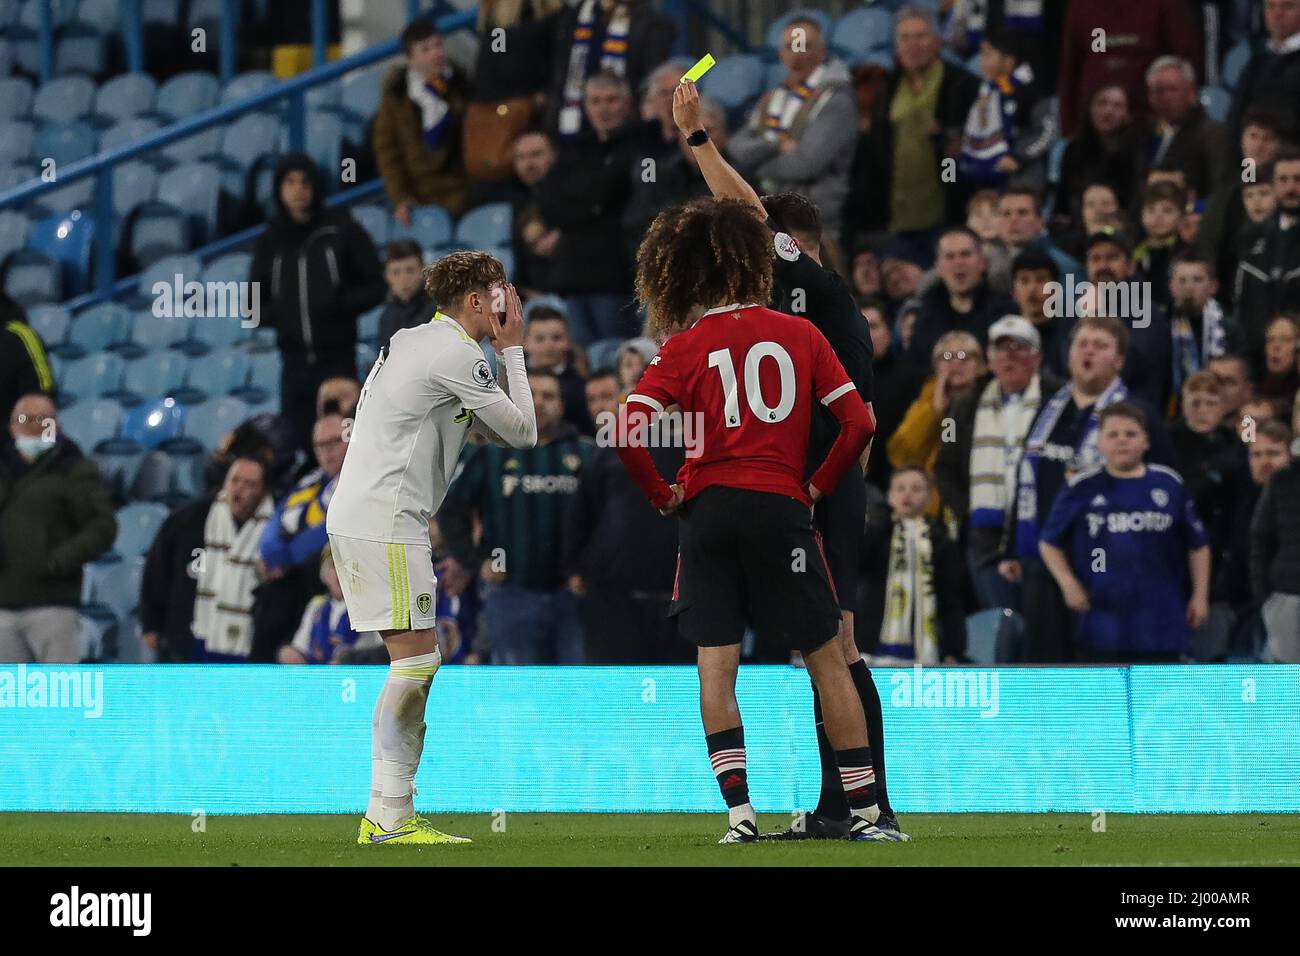 Leeds, UK. 15th Mar, 2022. Referee Thomas Kirk awards a yellow card to Lewis Bate #26 of Leeds United during the first half in Leeds, United Kingdom on 3/15/2022. (Photo by James Heaton/News Images/Sipa USA) Credit: Sipa USA/Alamy Live News Stock Photo